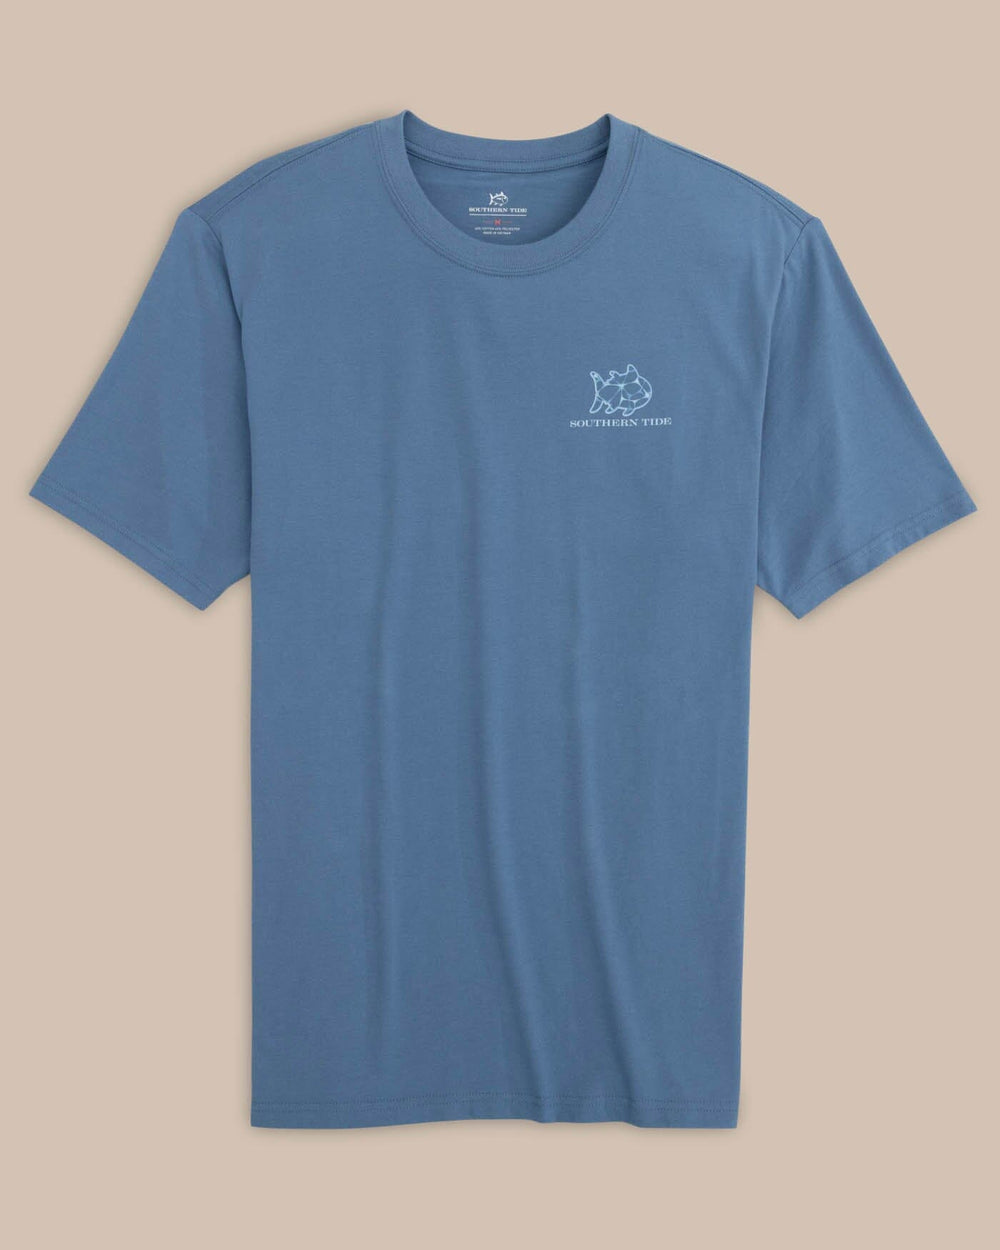 The front view of the Southern Tide Sailing with Skipjacks Short Sleeve T-Shirt by Southern Tide - Coronet Blue